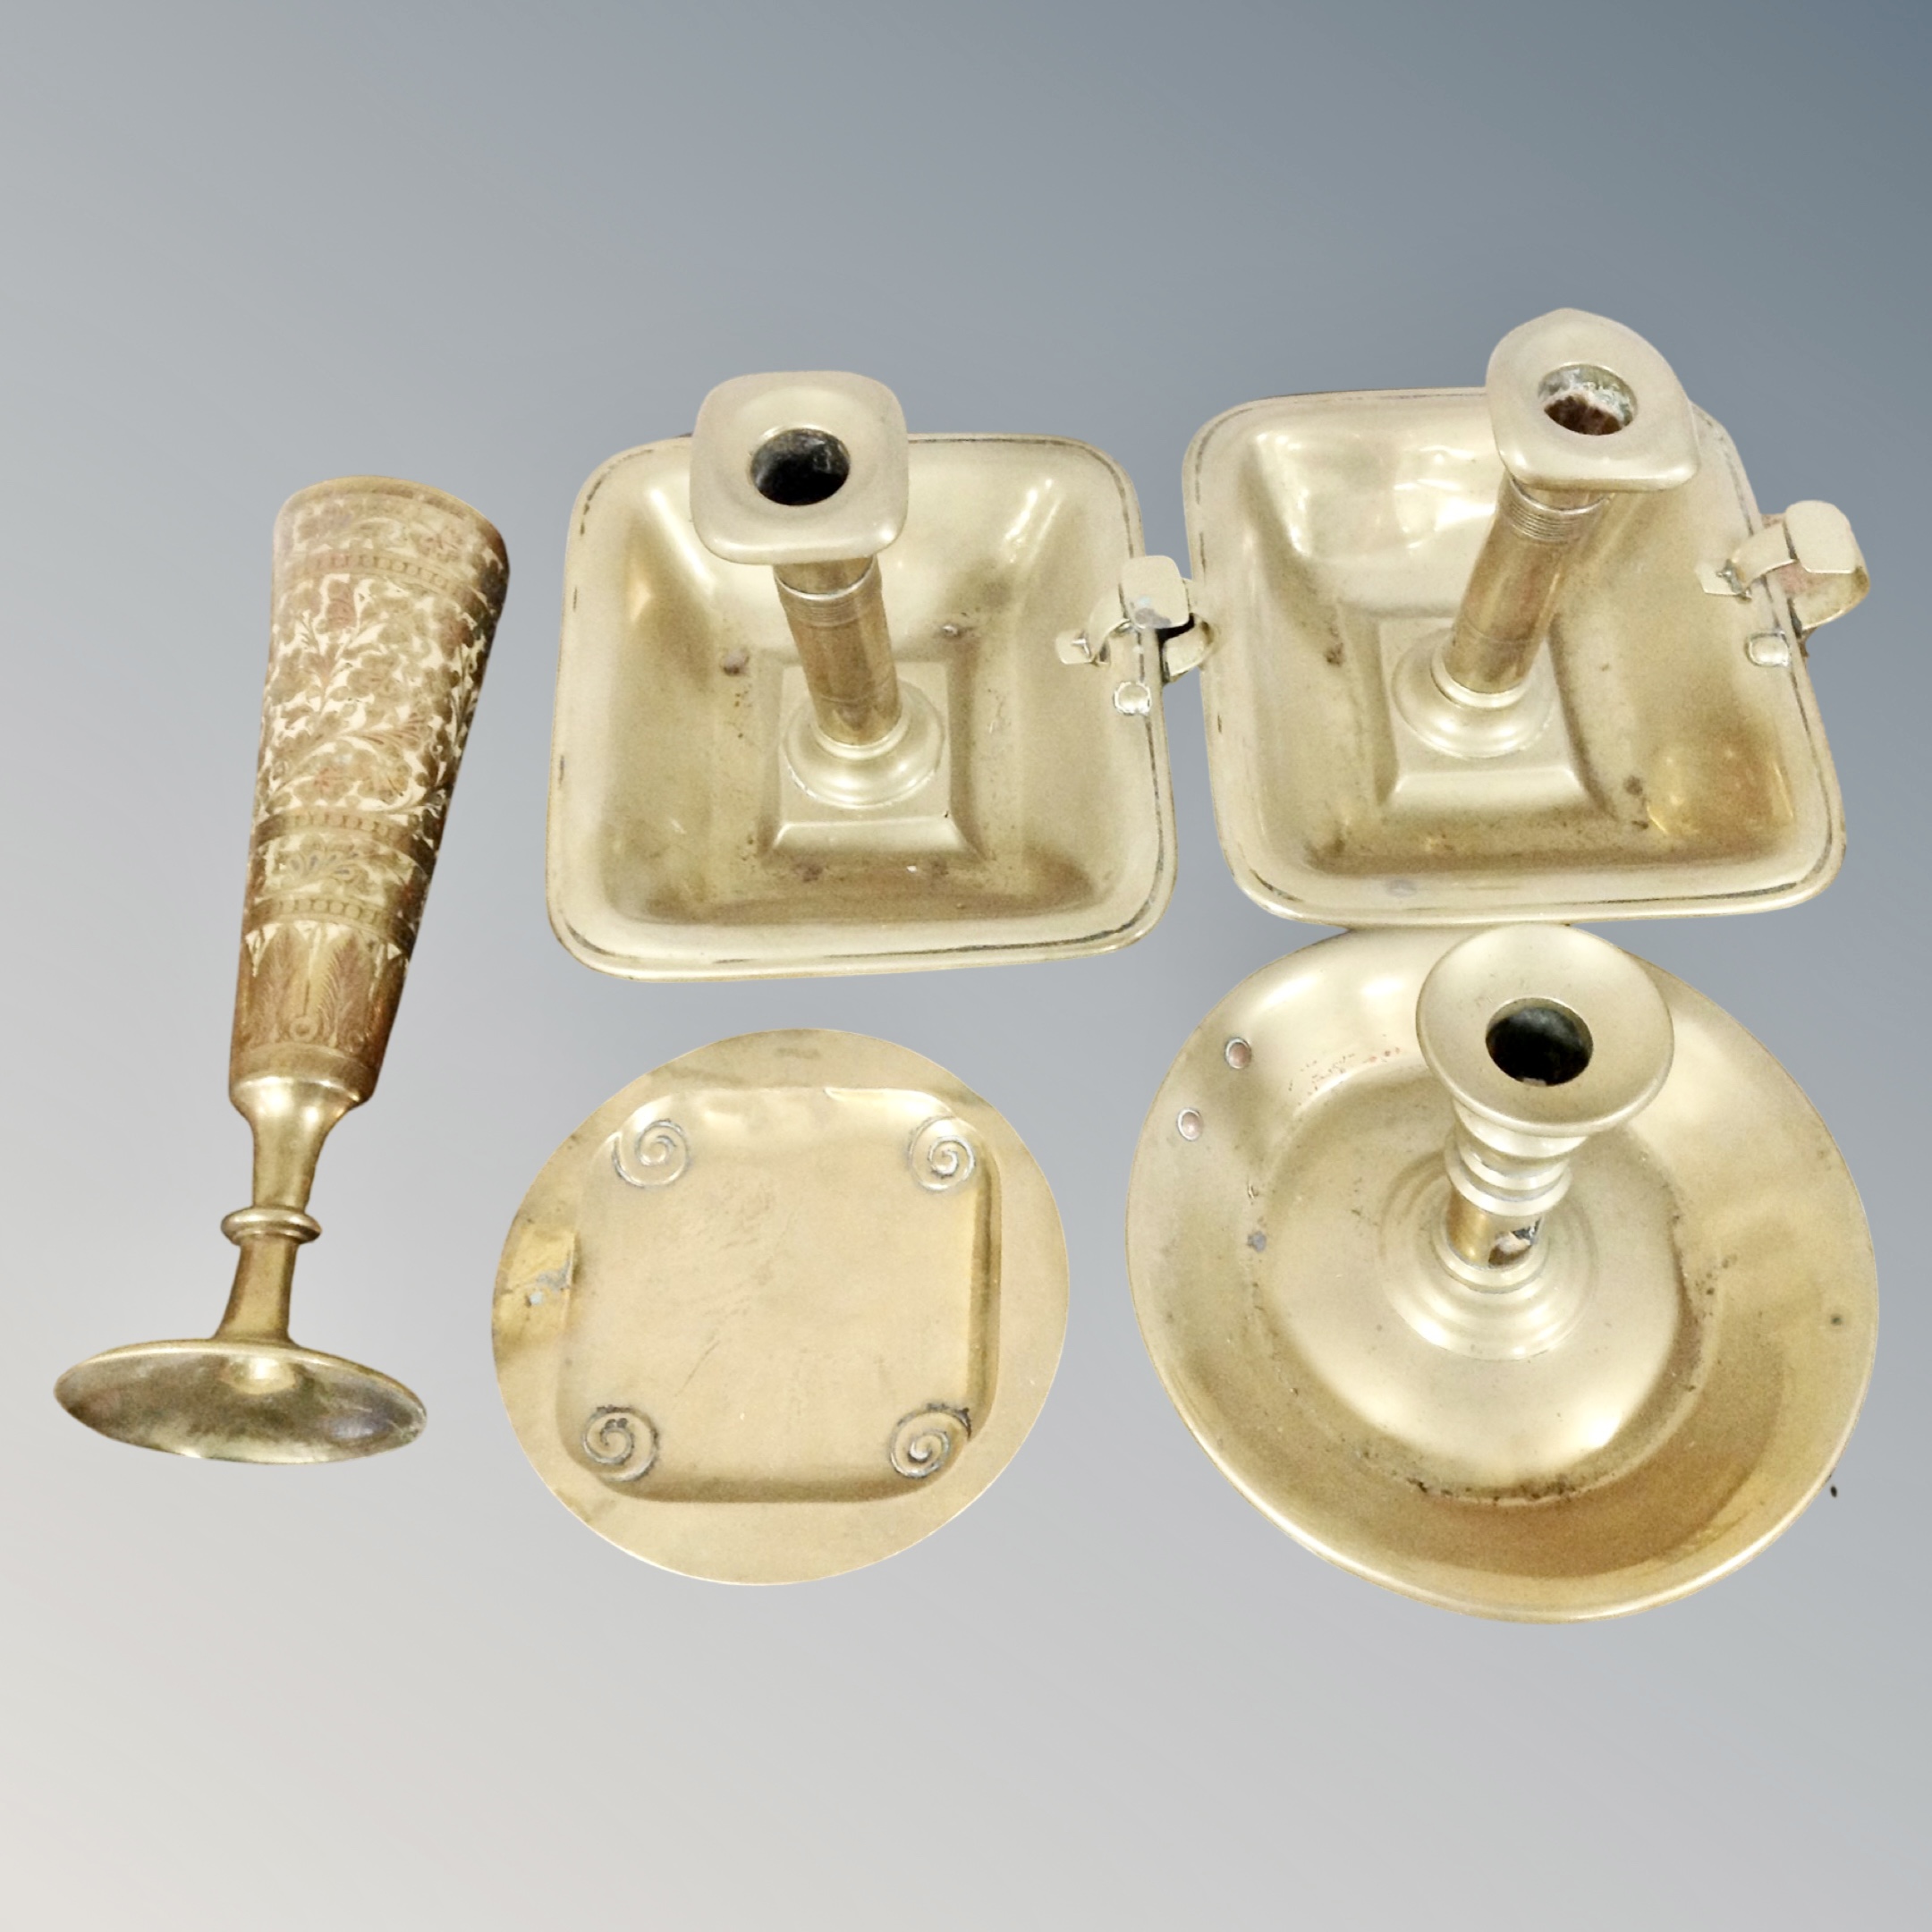 Three brass chamber sticks, Indian engraved brass vase and ashtray.